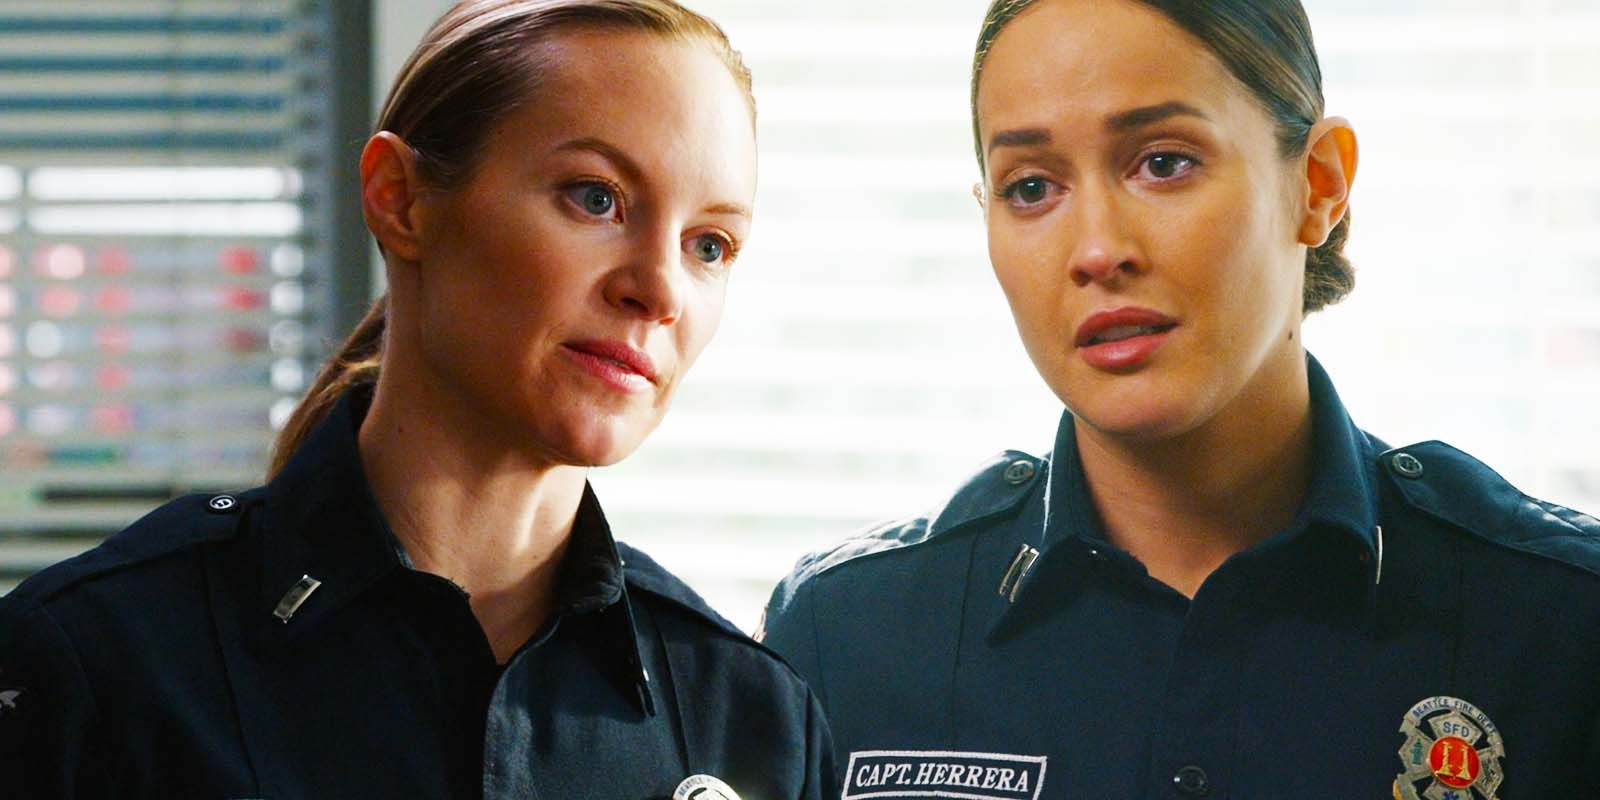 Station 19 Season 7 Promises A Fitting End For The Show's Best Friendship